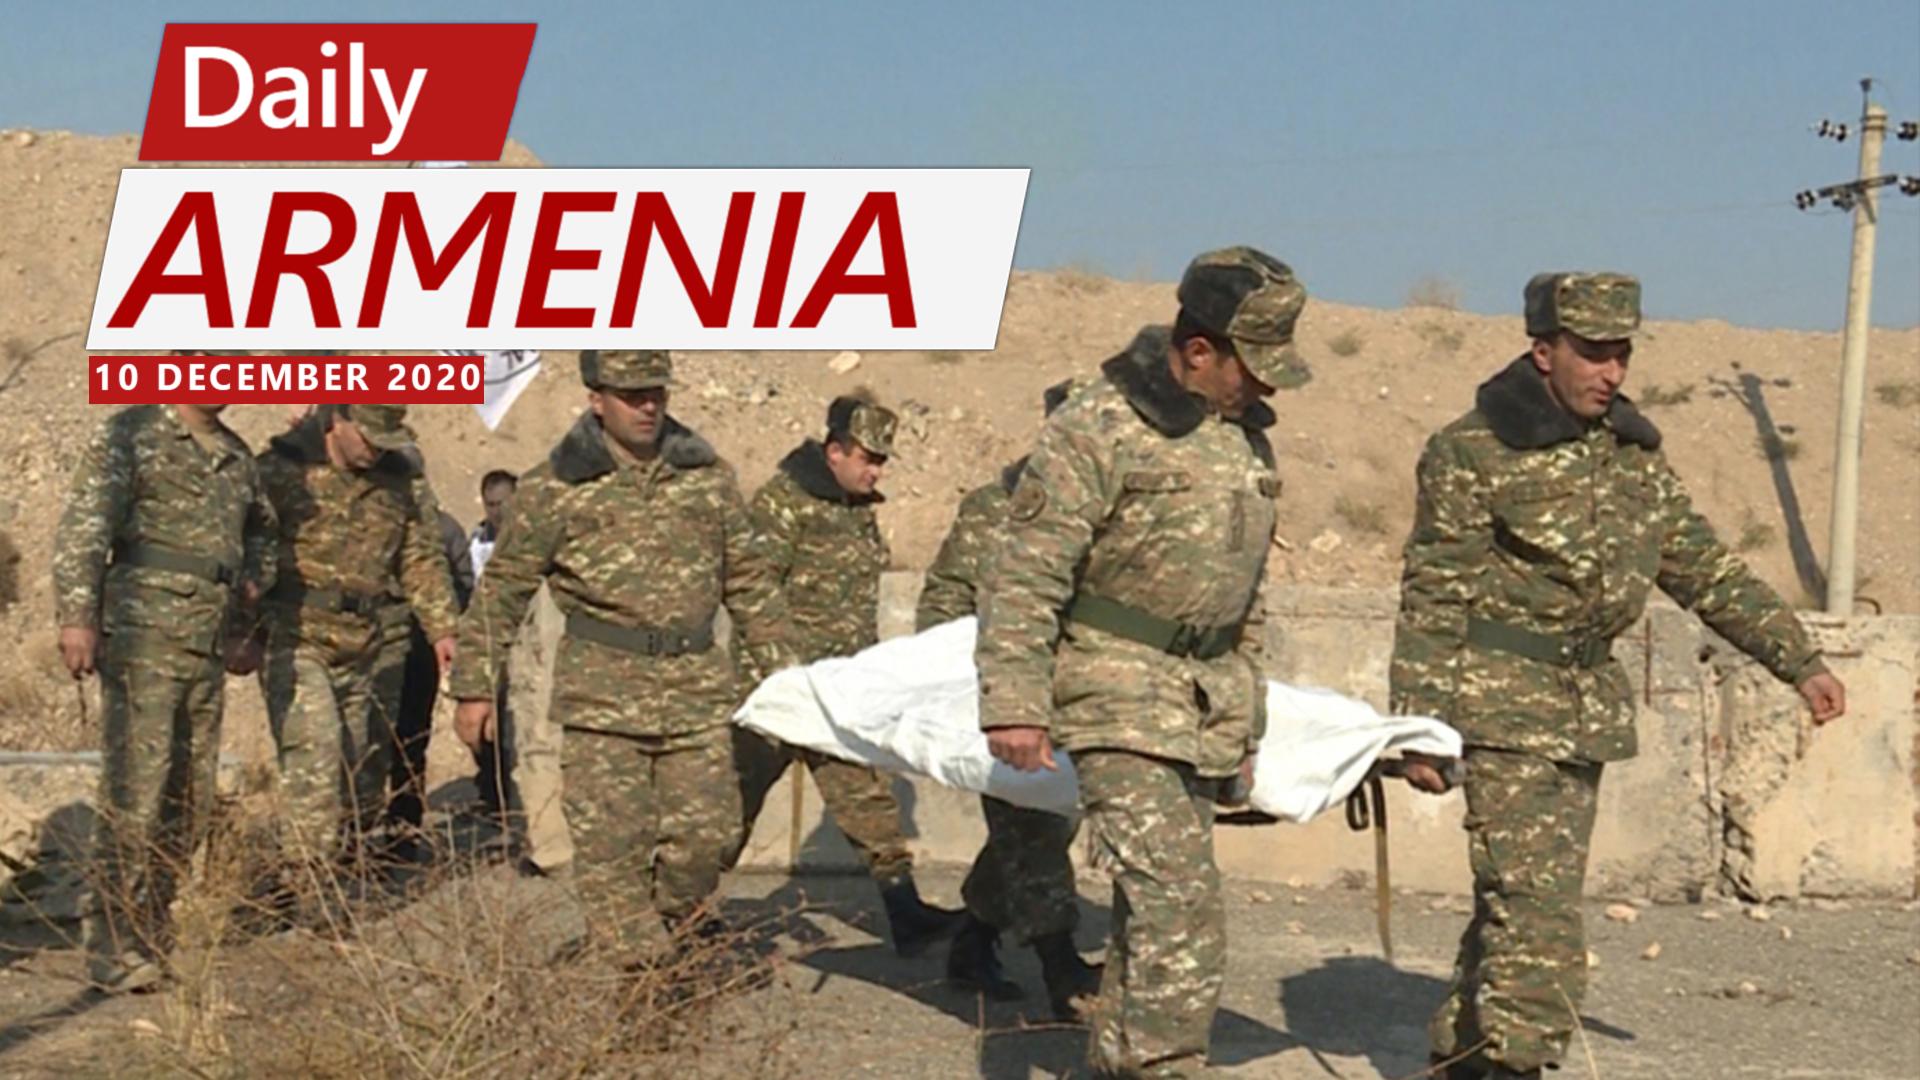 Three Elderly Civilian Prisoners Returned to Armenia, One Dies Shortly After Arrival